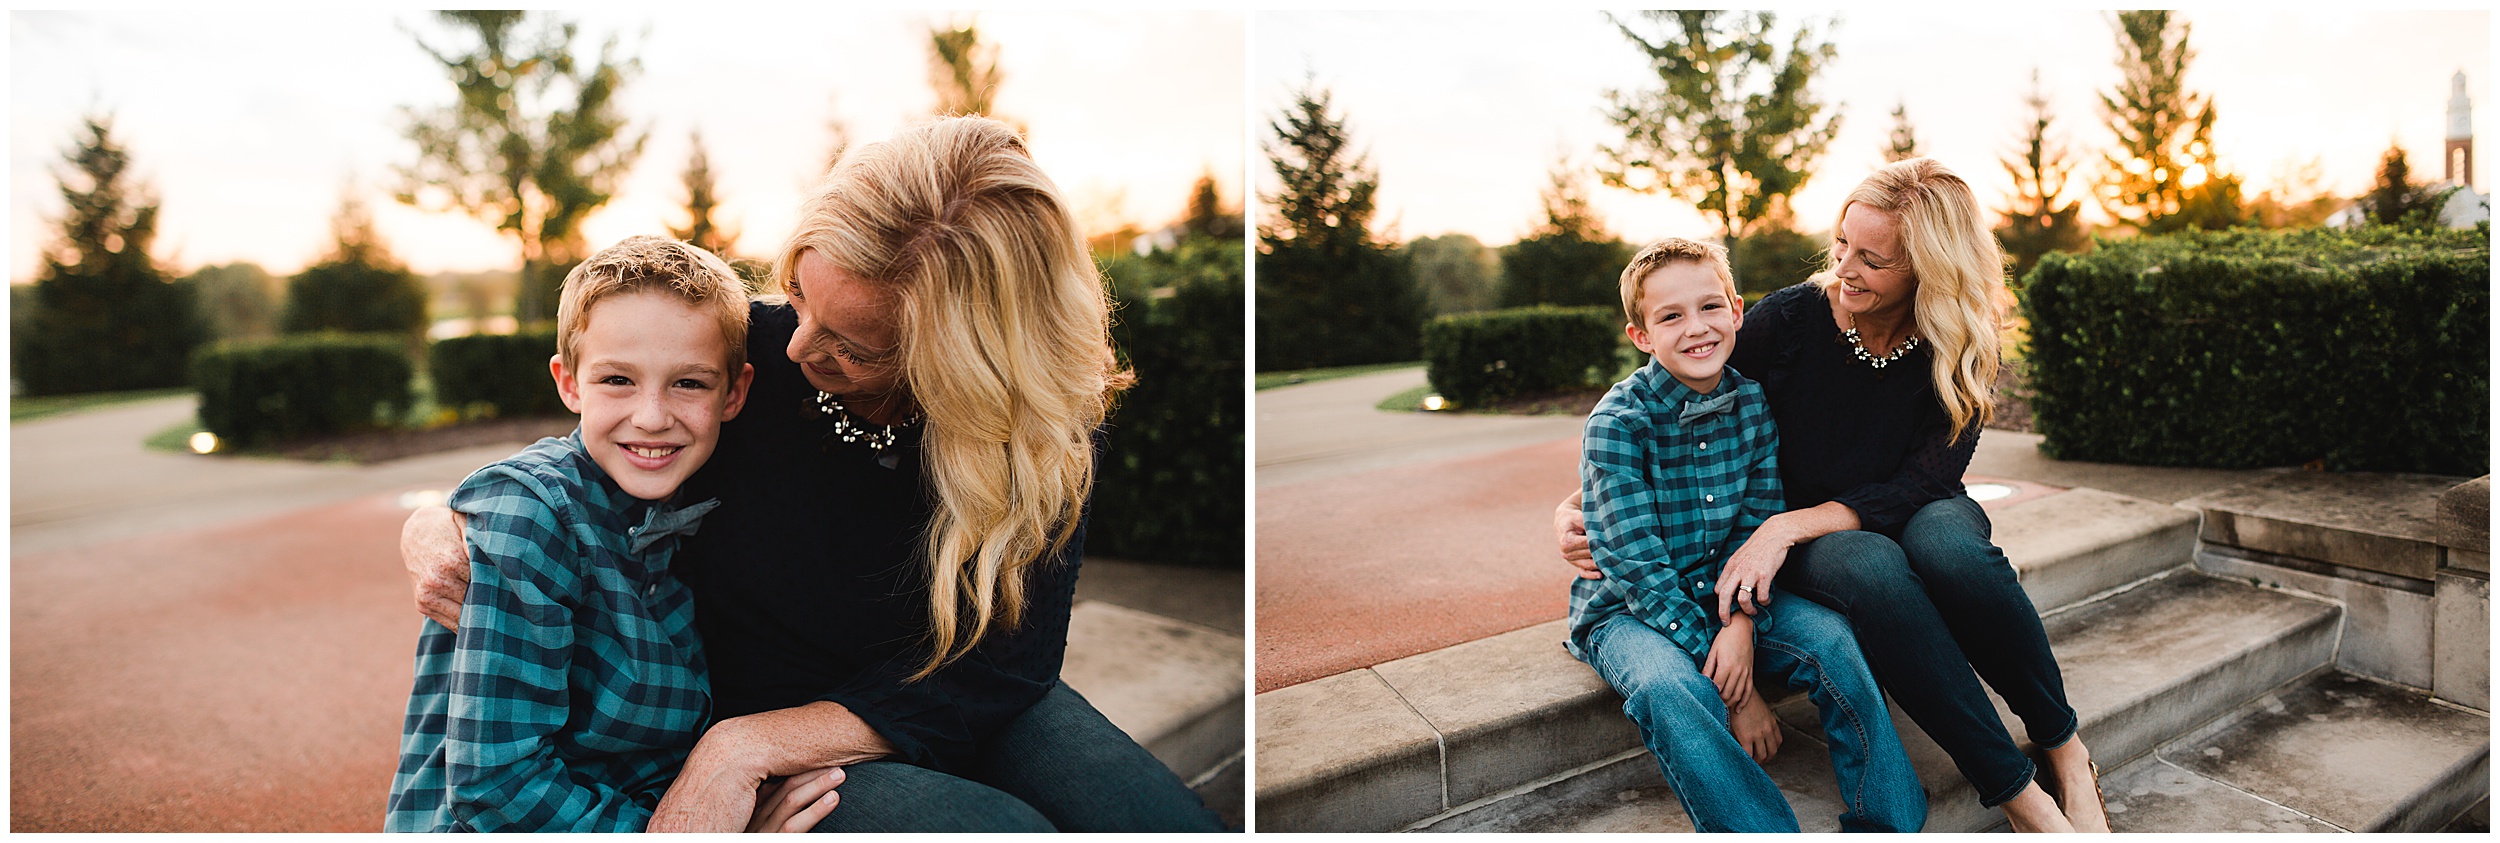 Indianapolis Family Photographer at Coxhall Gardens